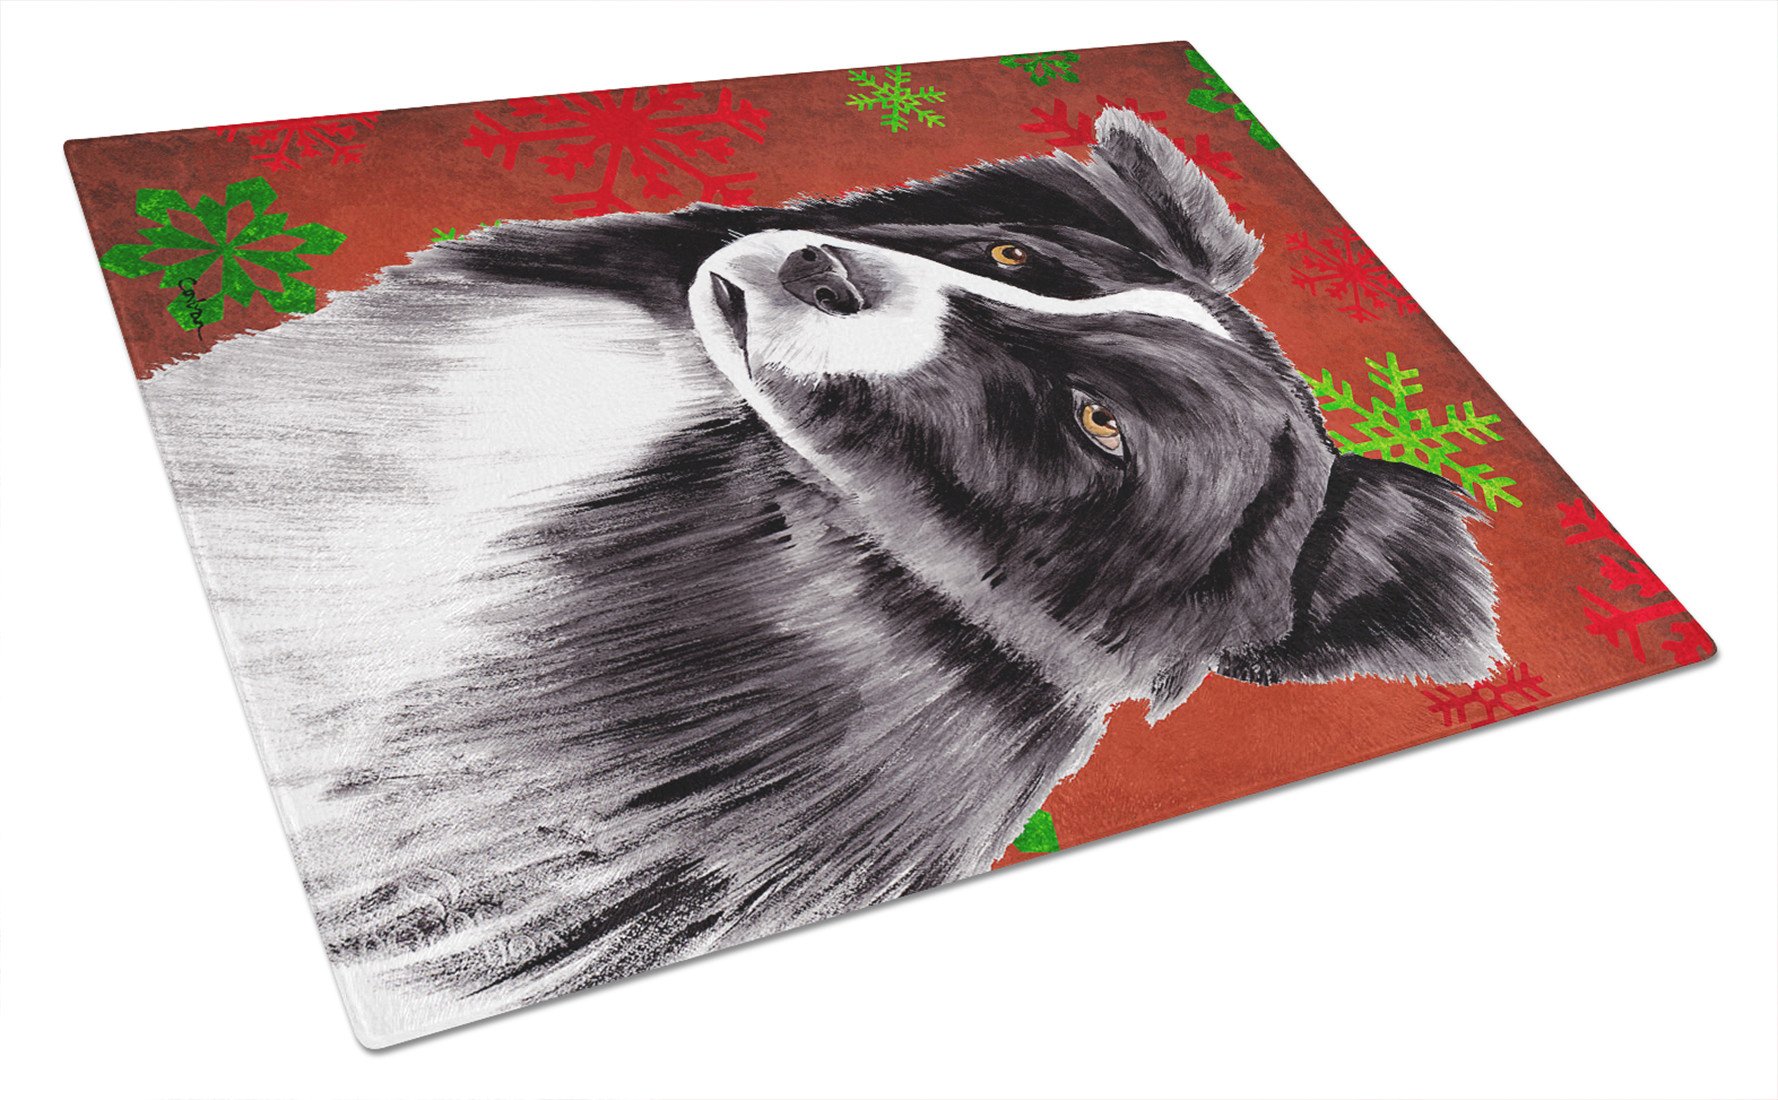 Border Collie Red and Green Snowflakes Christmas Glass Cutting Board Large by Caroline's Treasures